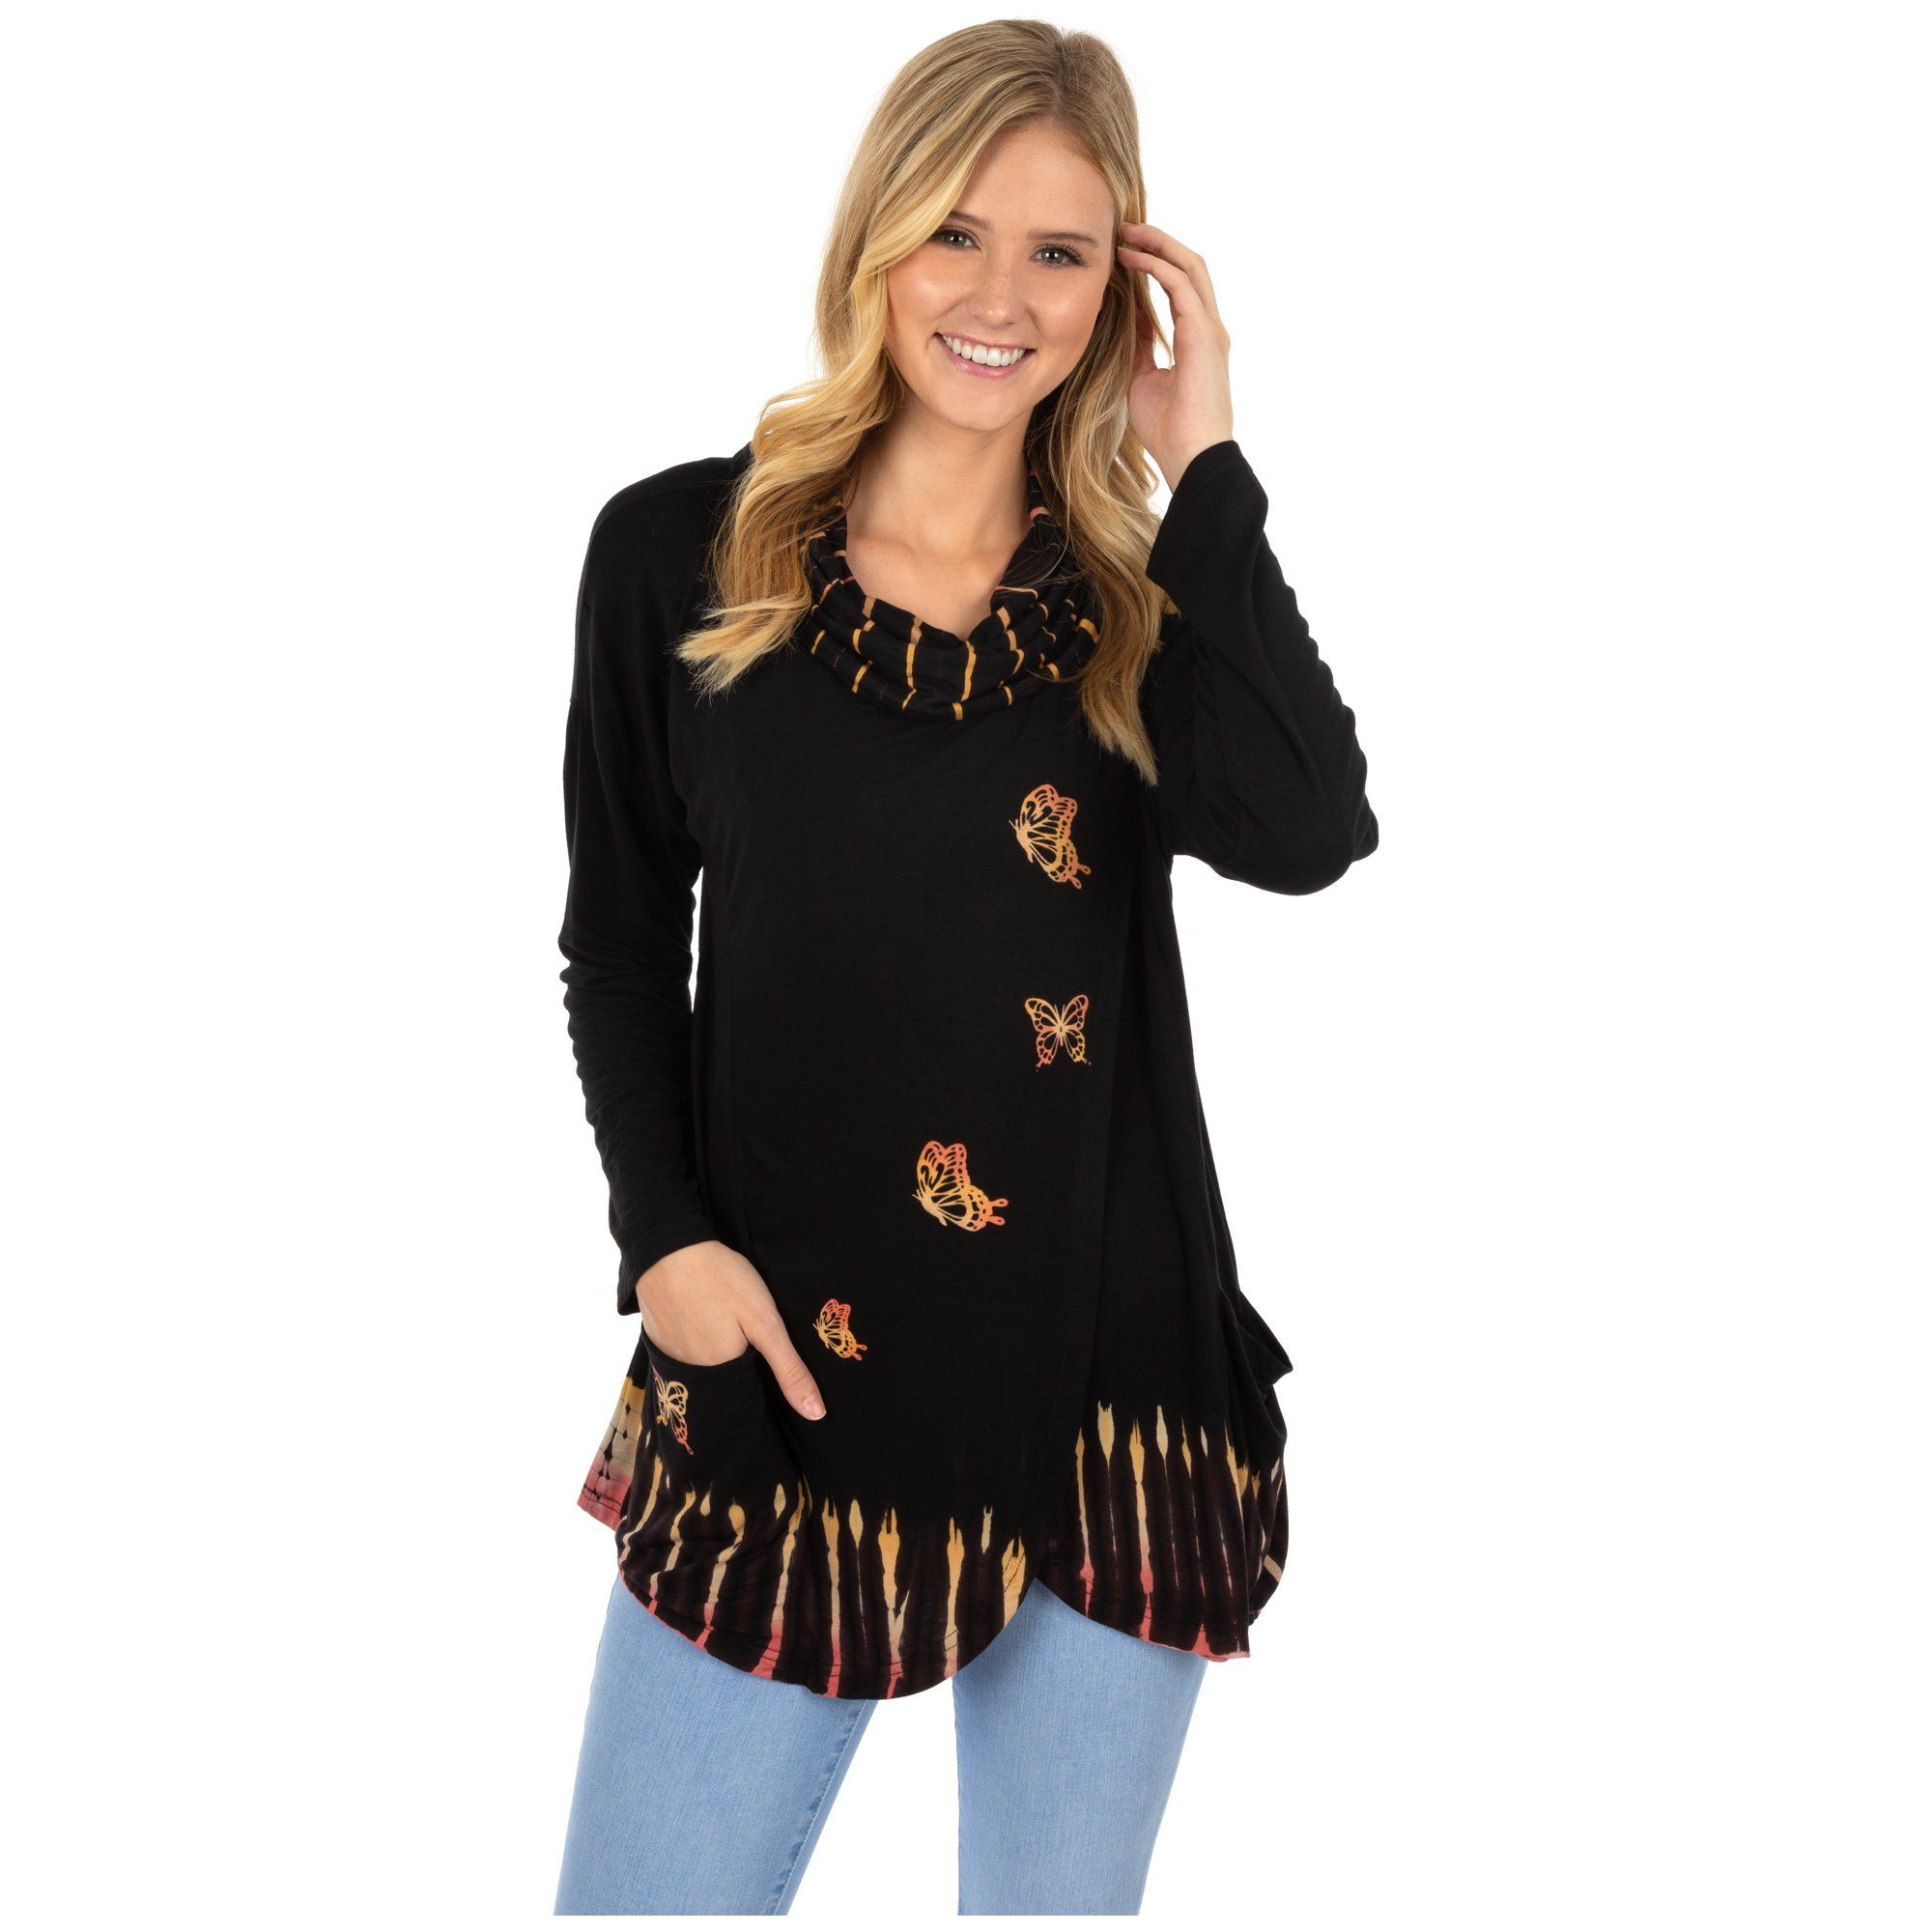 Butterfly Dawn Crossover Tunic - 3X